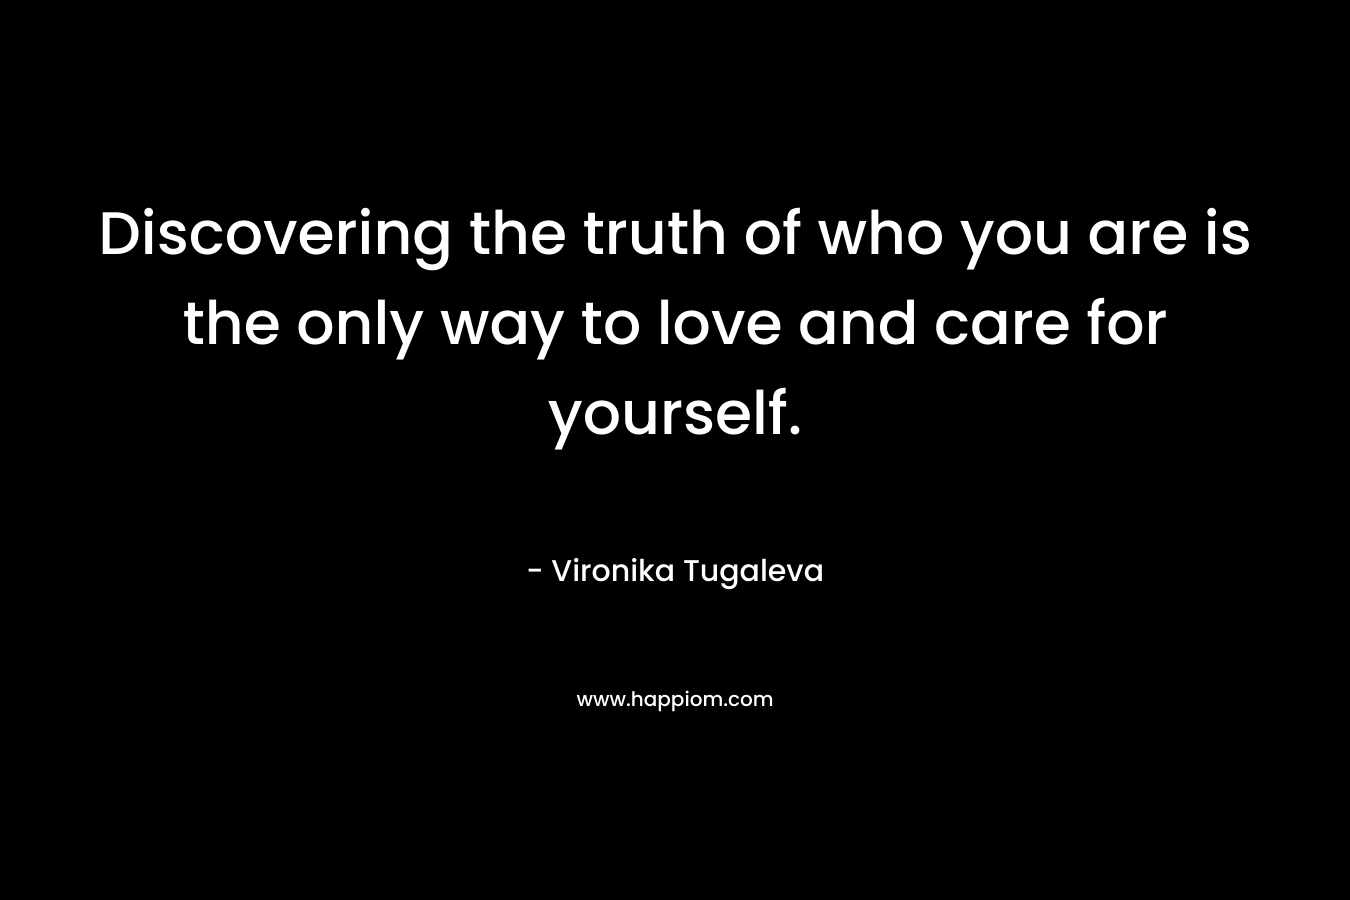 Discovering the truth of who you are is the only way to love and care for yourself. – Vironika Tugaleva